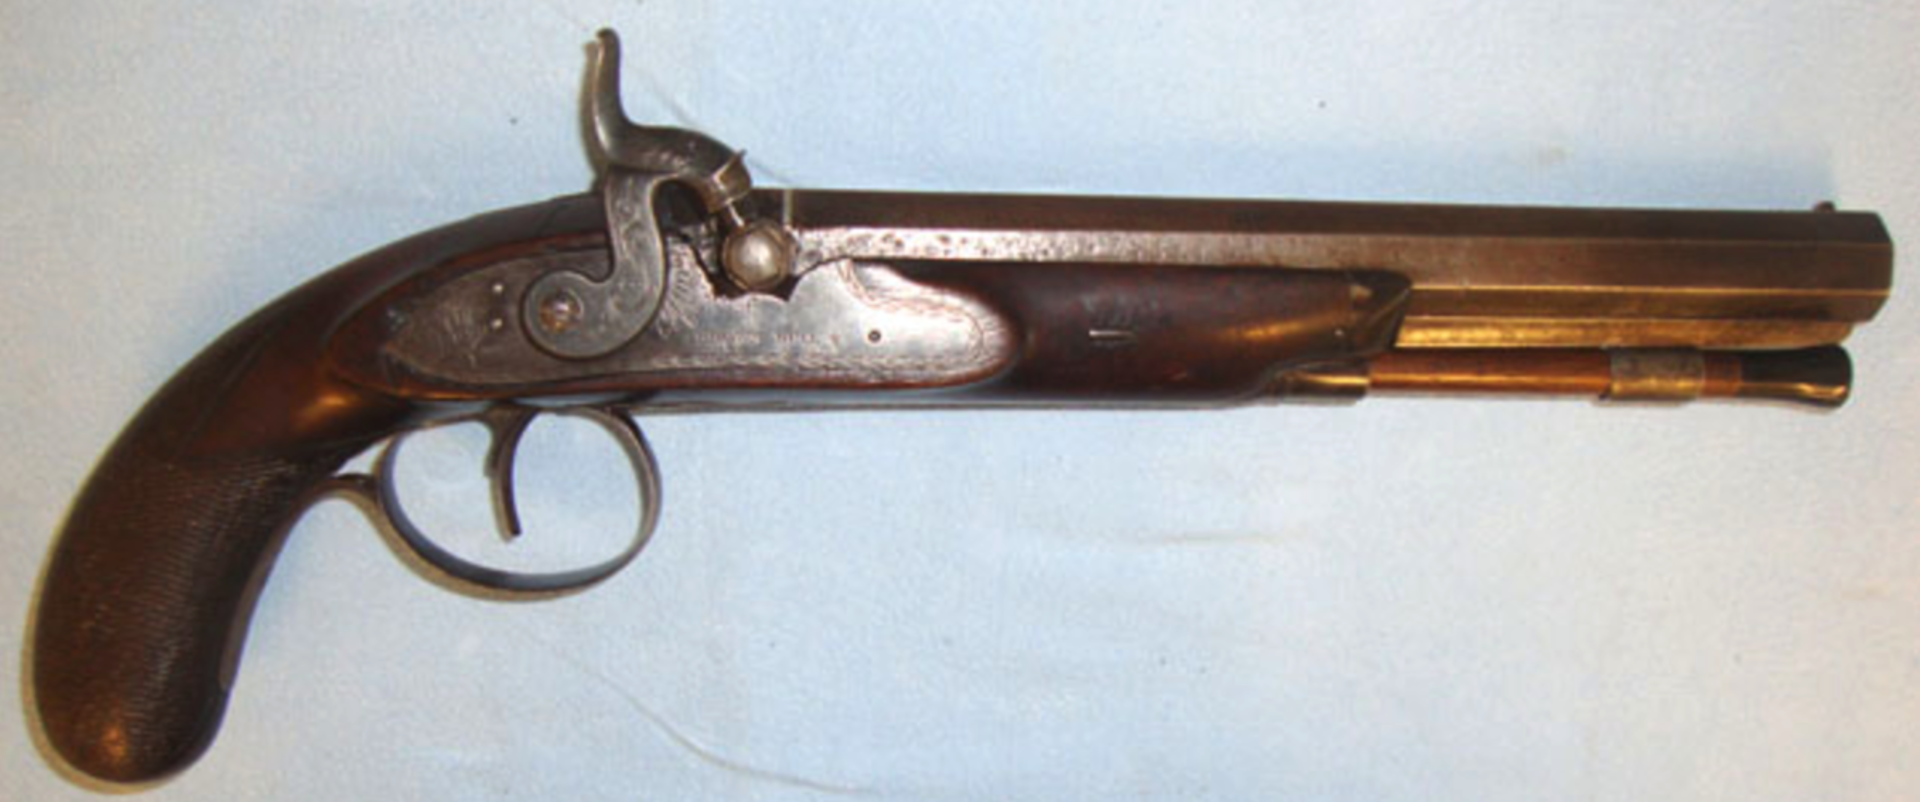 1840 – 1842 English .60” Bore Percussion Pistol (Converted From Flintlock) By John Crosby Brown - Image 2 of 3